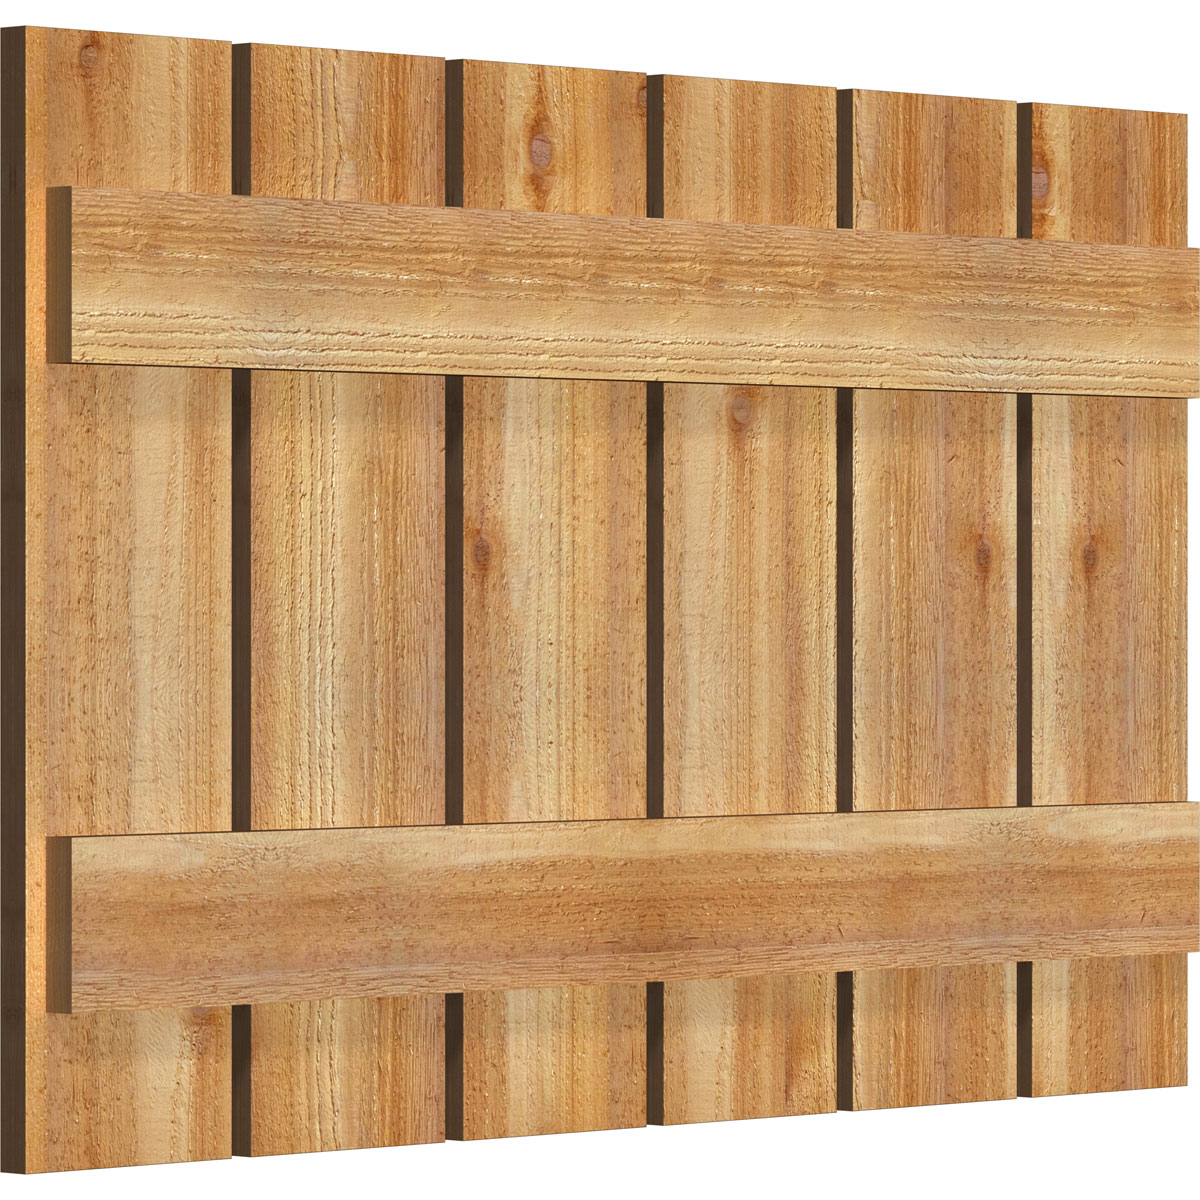 Ekena Millwork 2-Pack 34.75-in W x 22-in H Unfinished Board and Batten Spaced Wood Western Red cedar Exterior Shutters